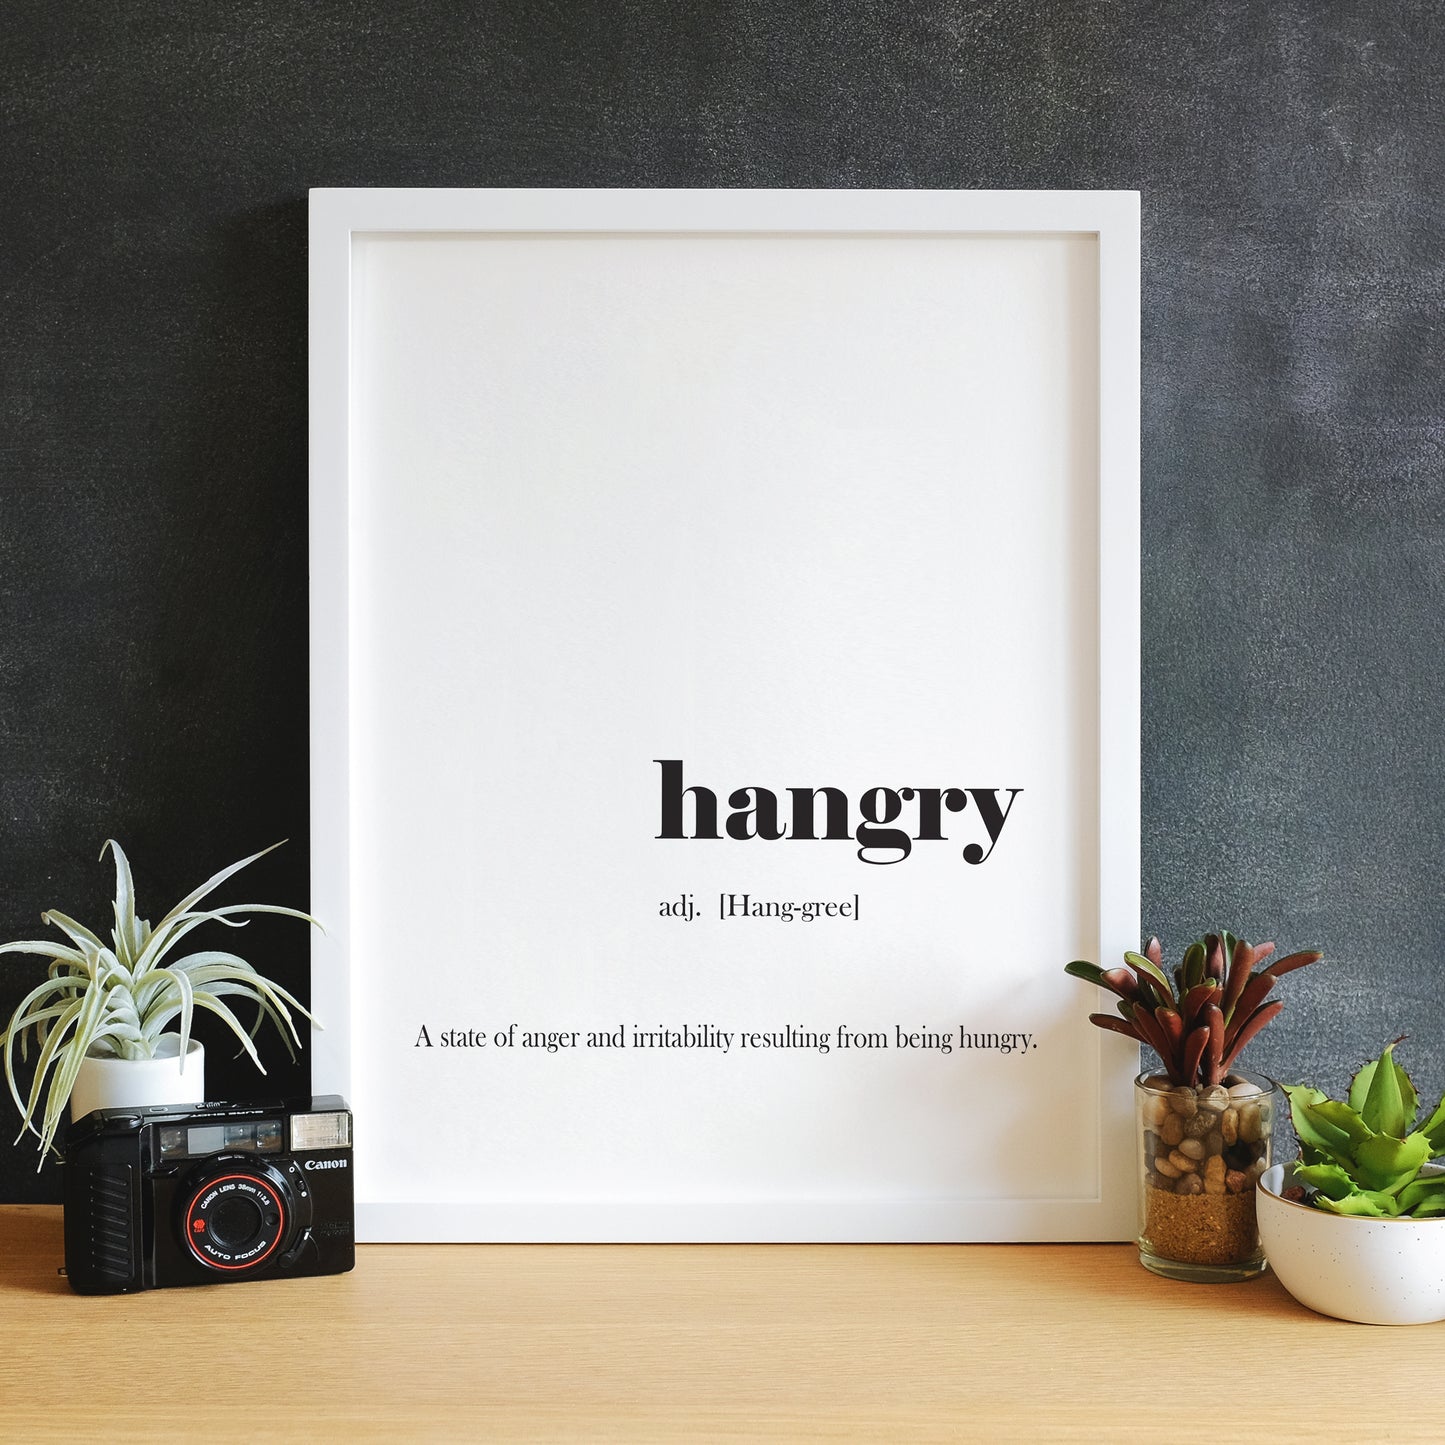 Hangry definition quote print